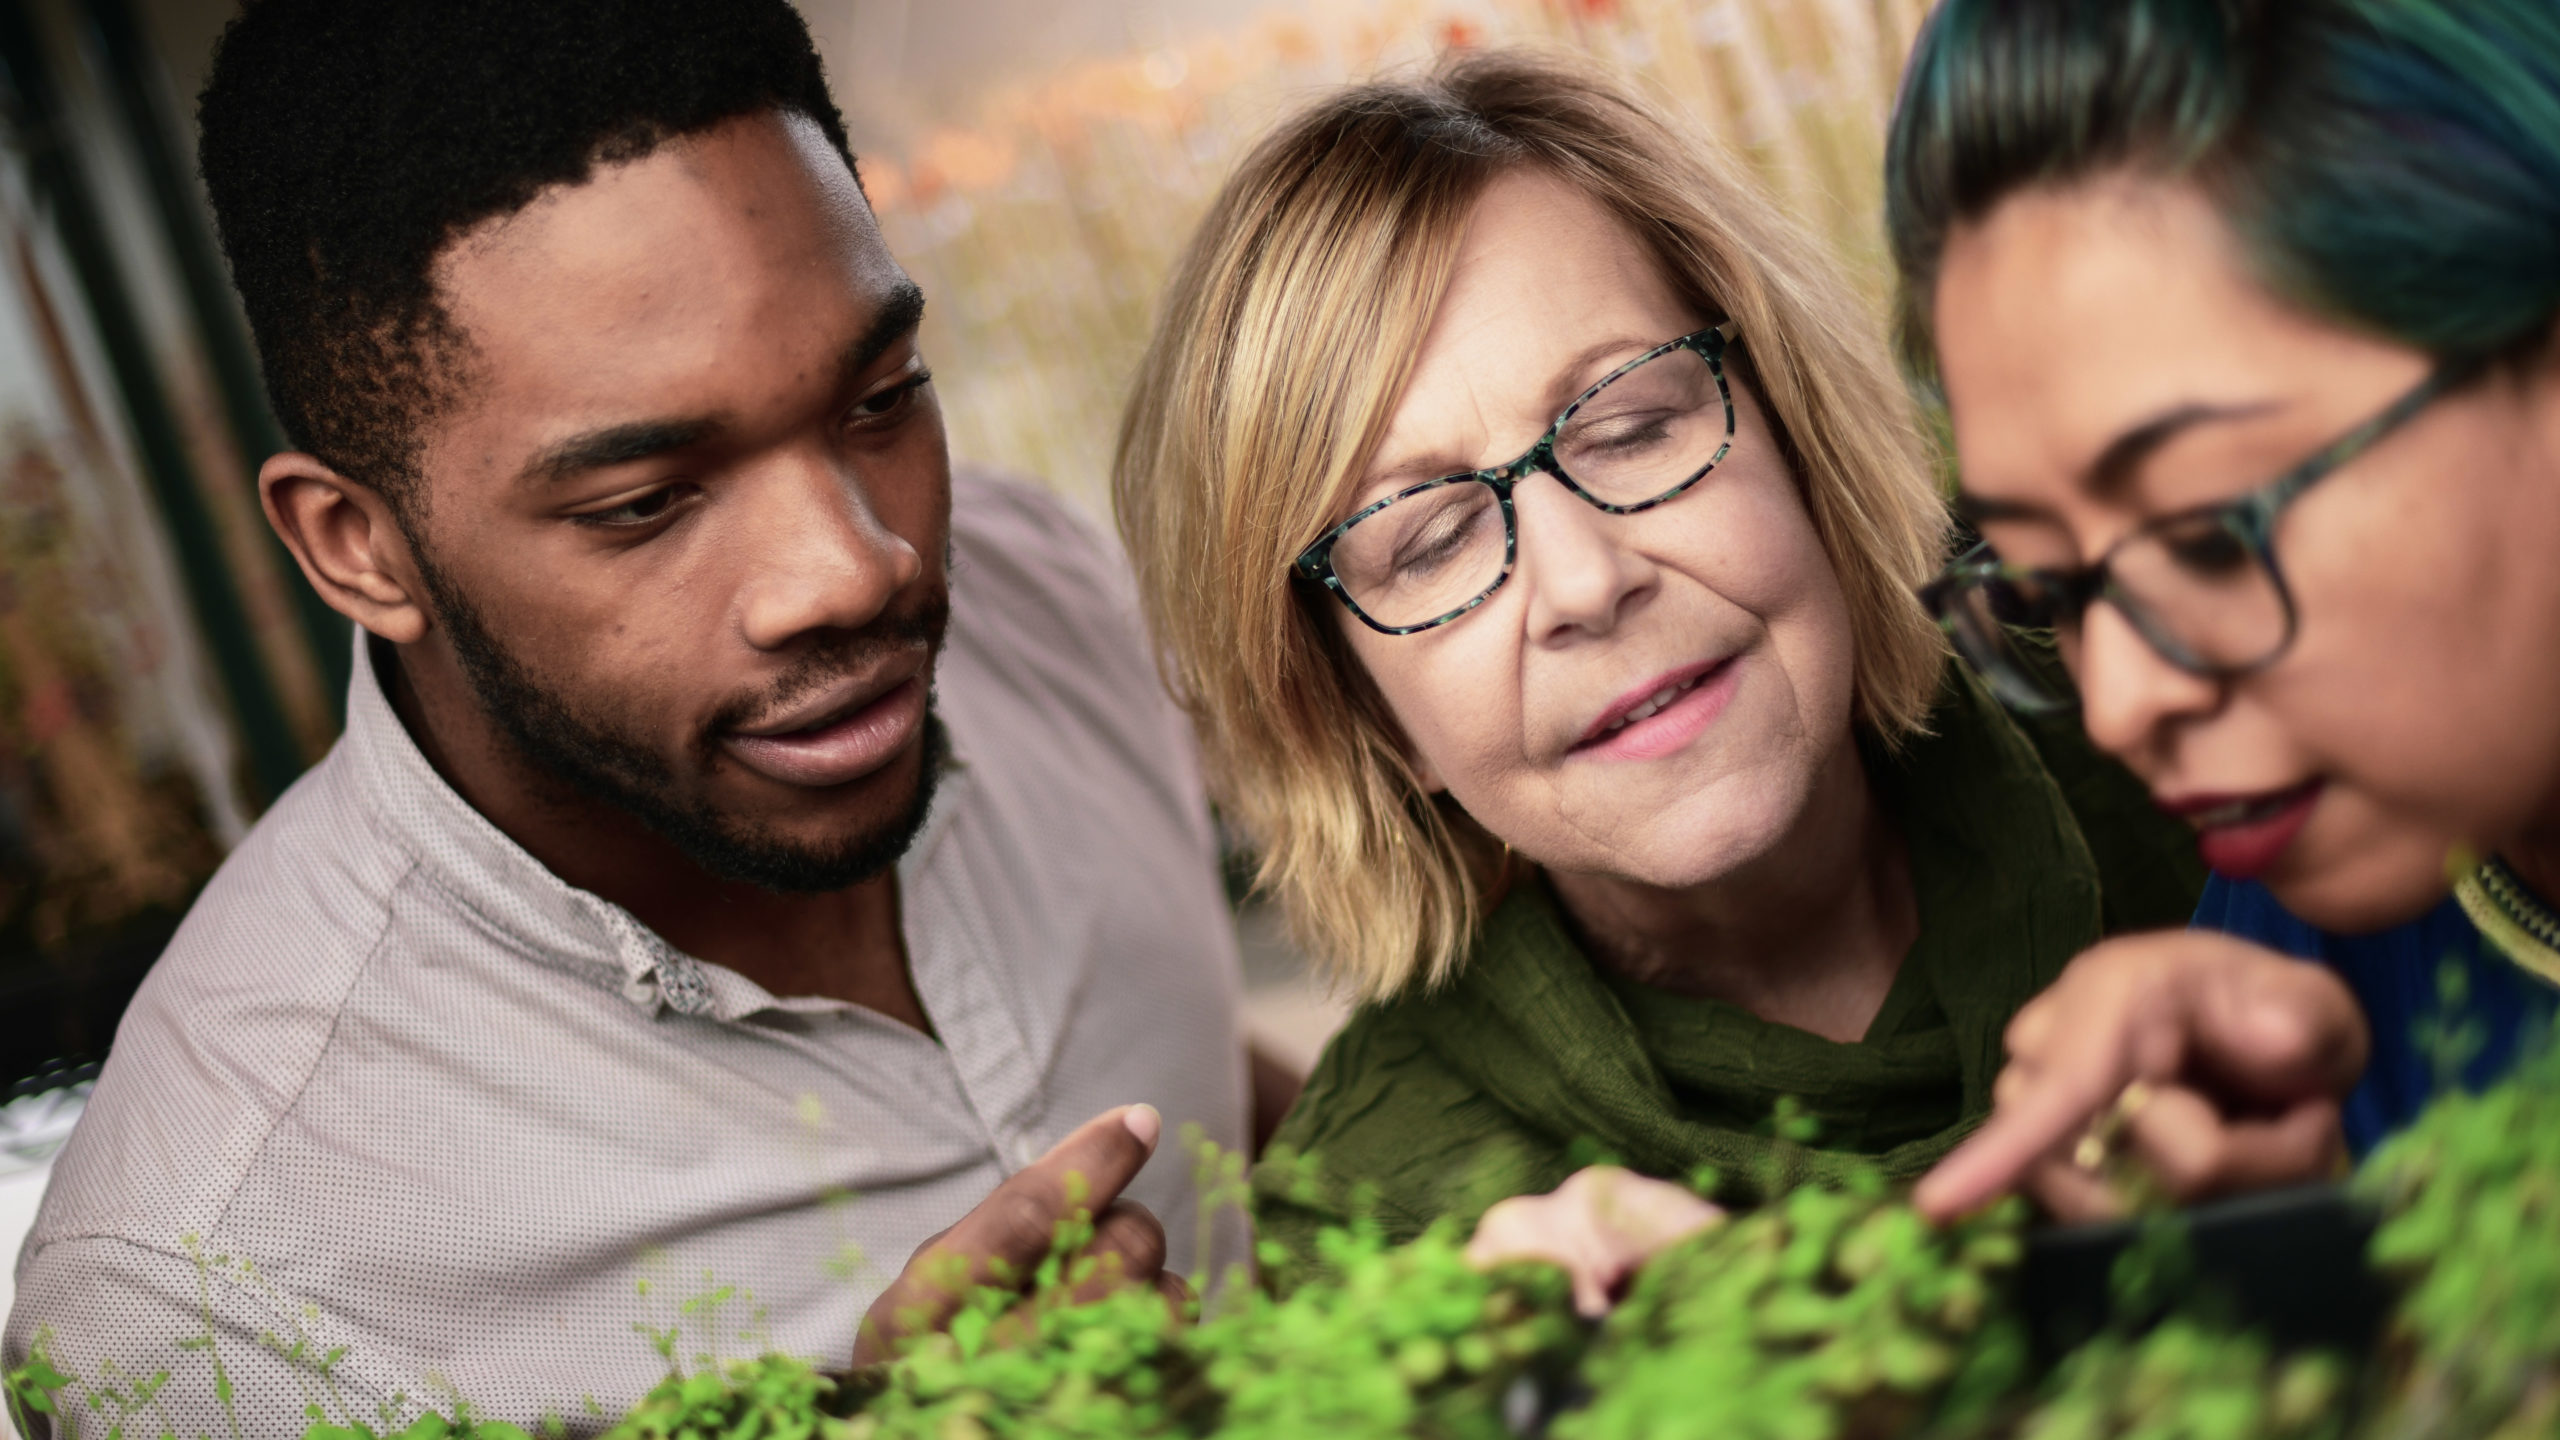 Three people of various ages looking at a green plant